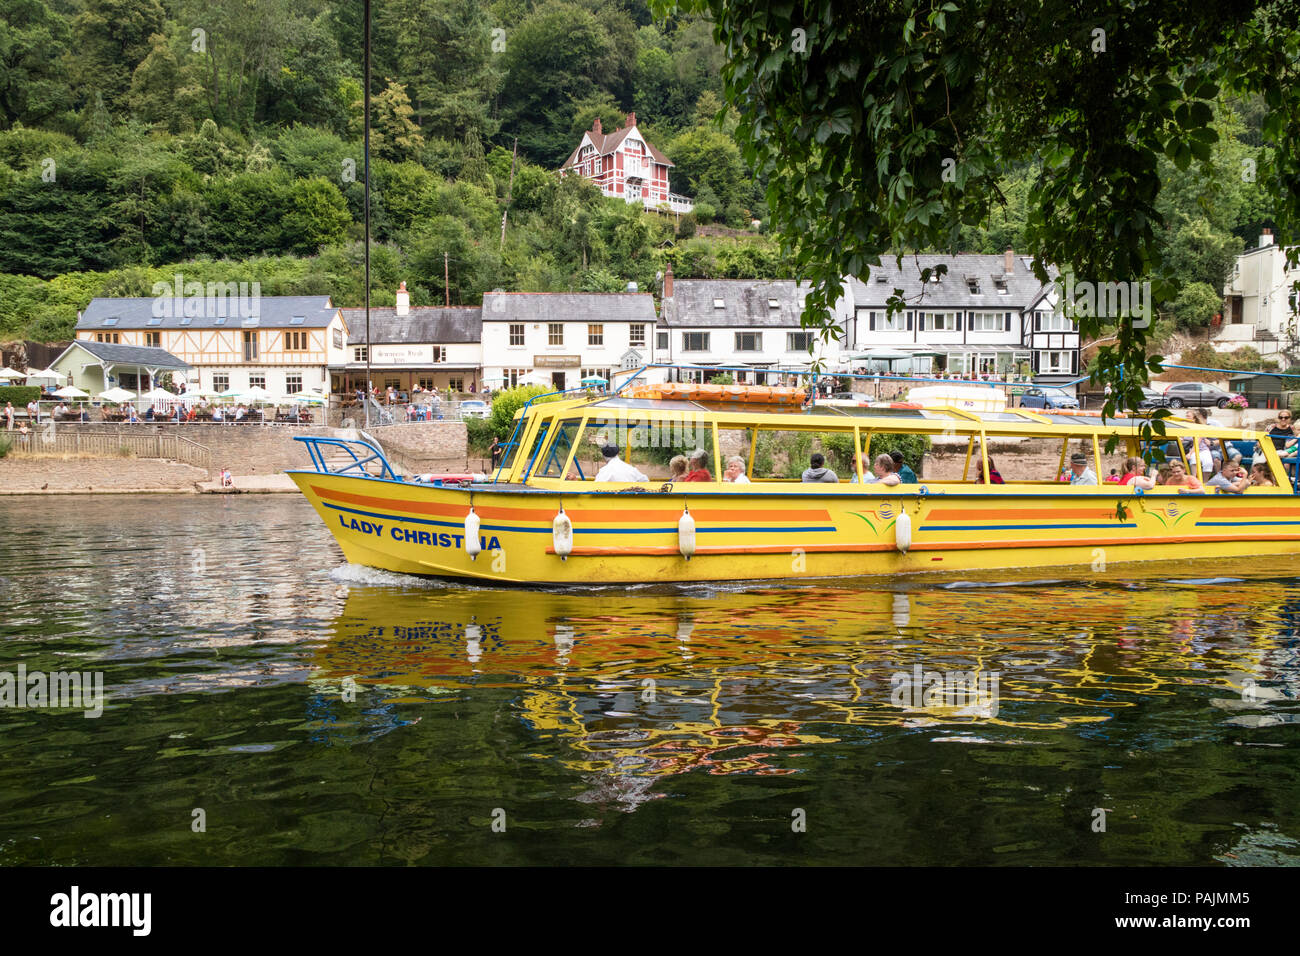 A trip boat on the River Wye at Symonds Yat East, Herefordshire, England, UK Stock Photo